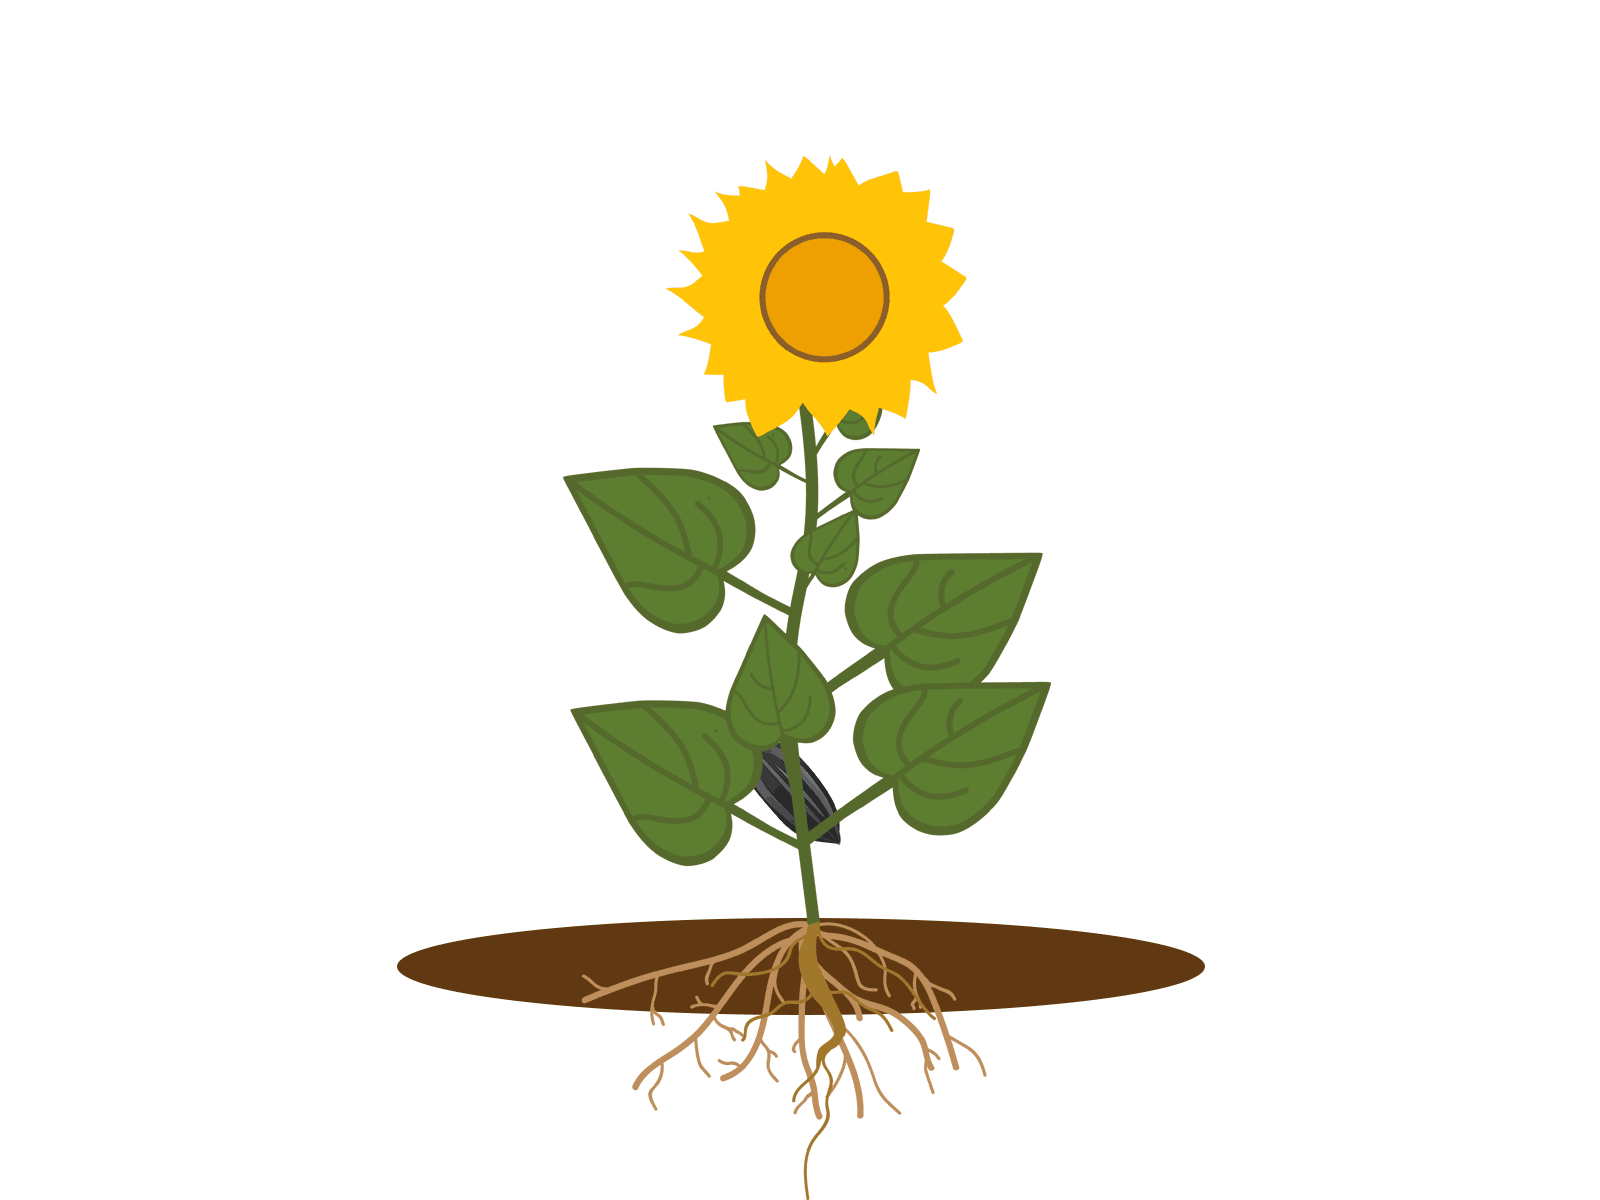 Animation of The Life Cycle of a Sunflower